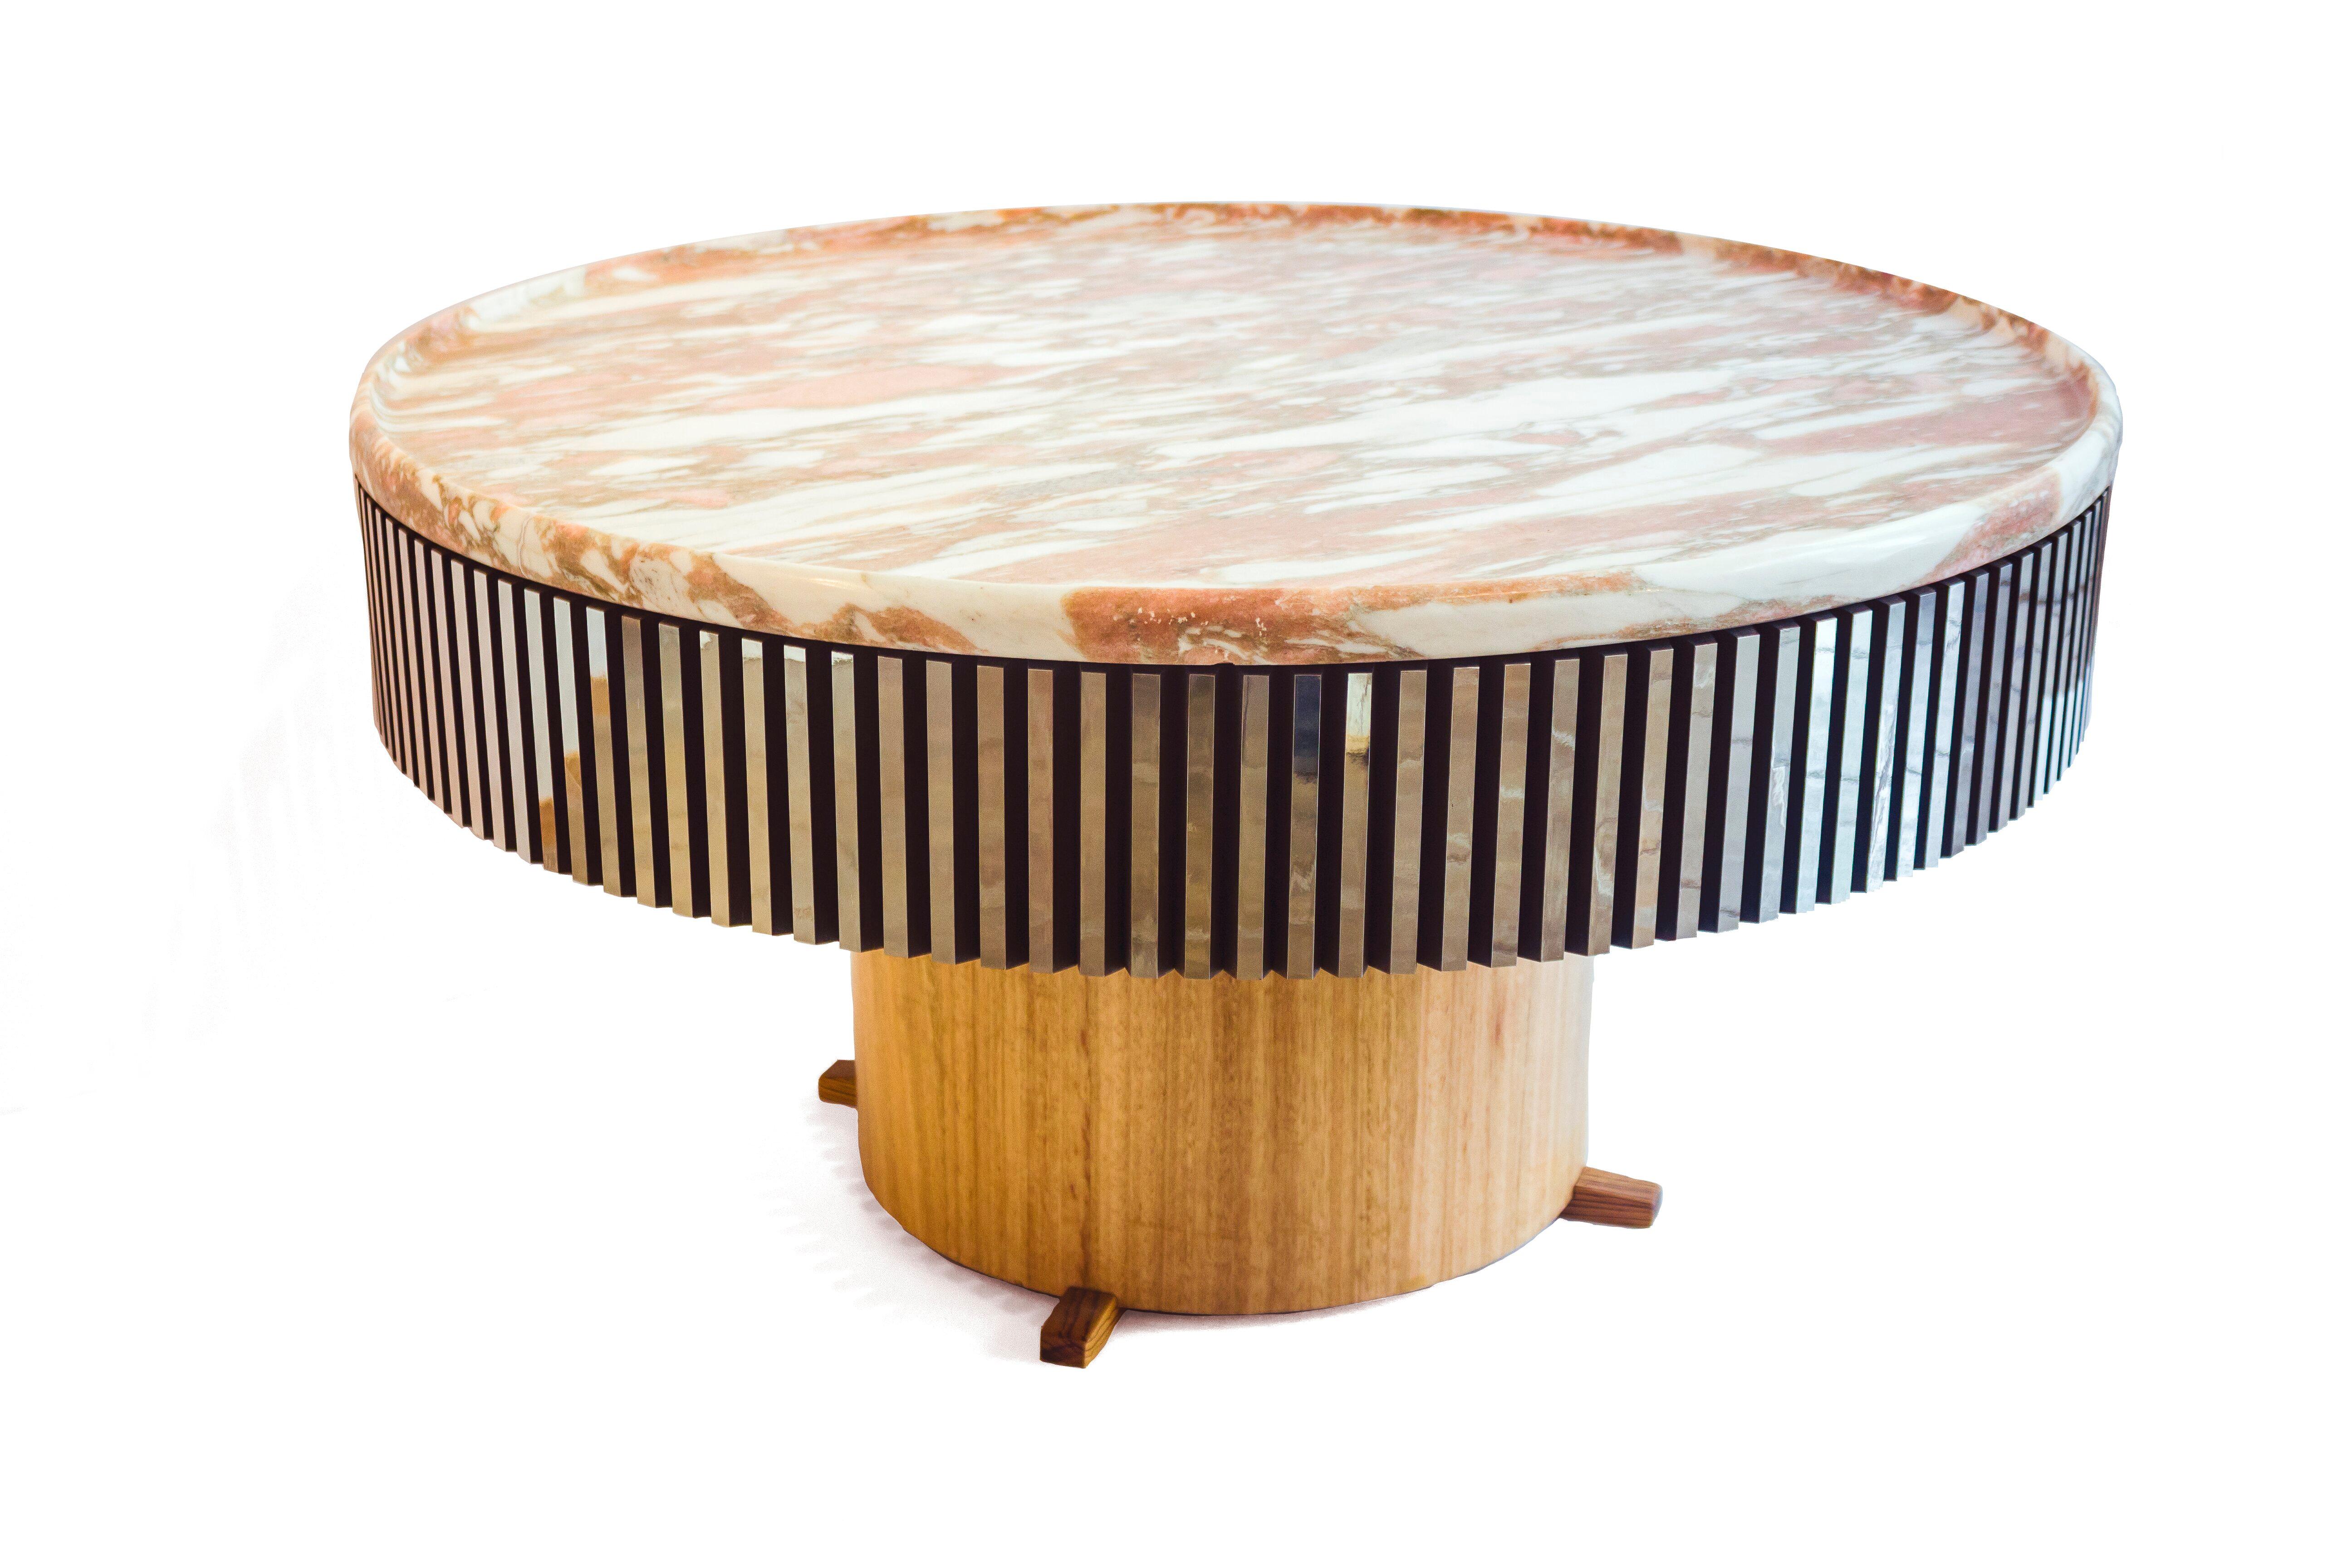 Discobolo is a table inspired to the 1930s made of eucalyptus wood, mirror polished aluminum bars and carved marble.
Discobolo center table can be made of different stones and sizes